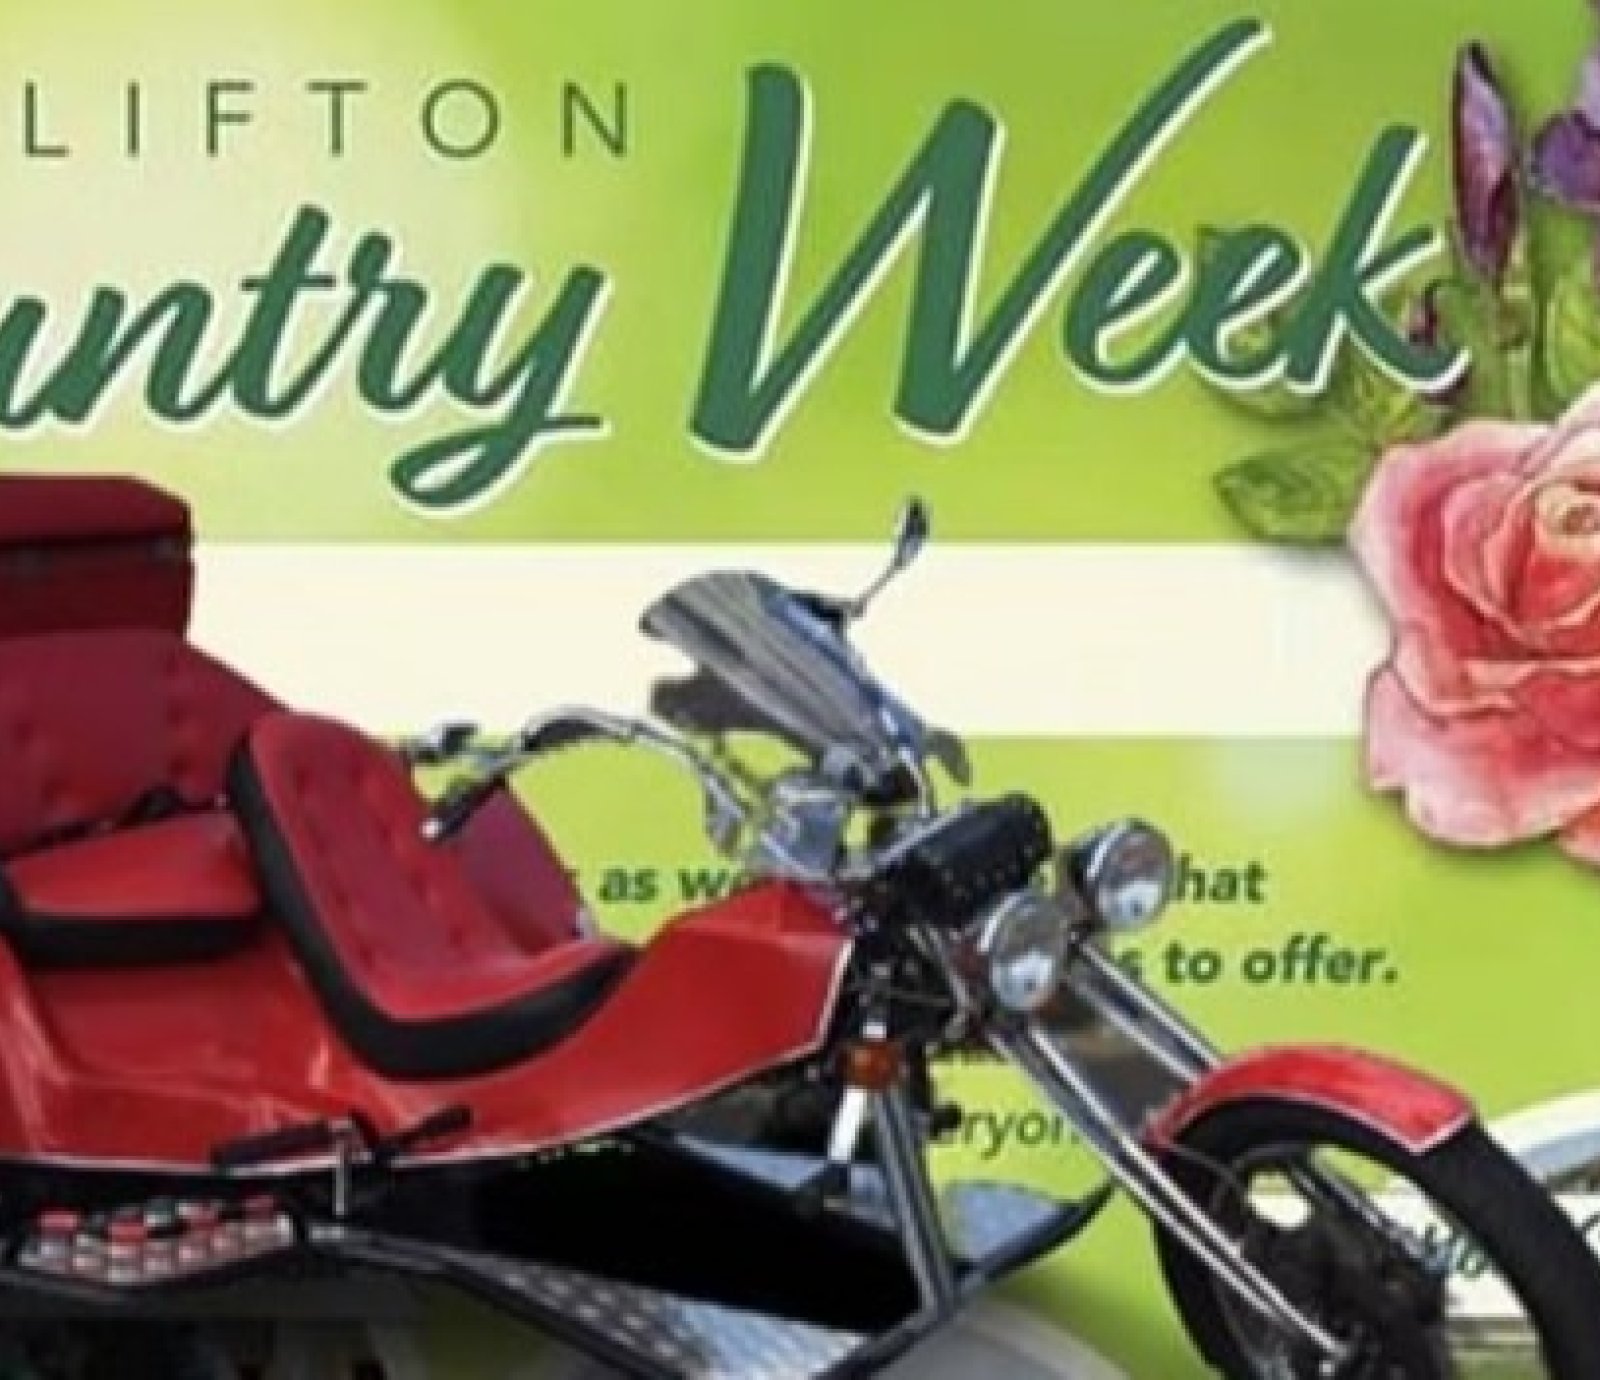 Clifton Country Week Short Tours